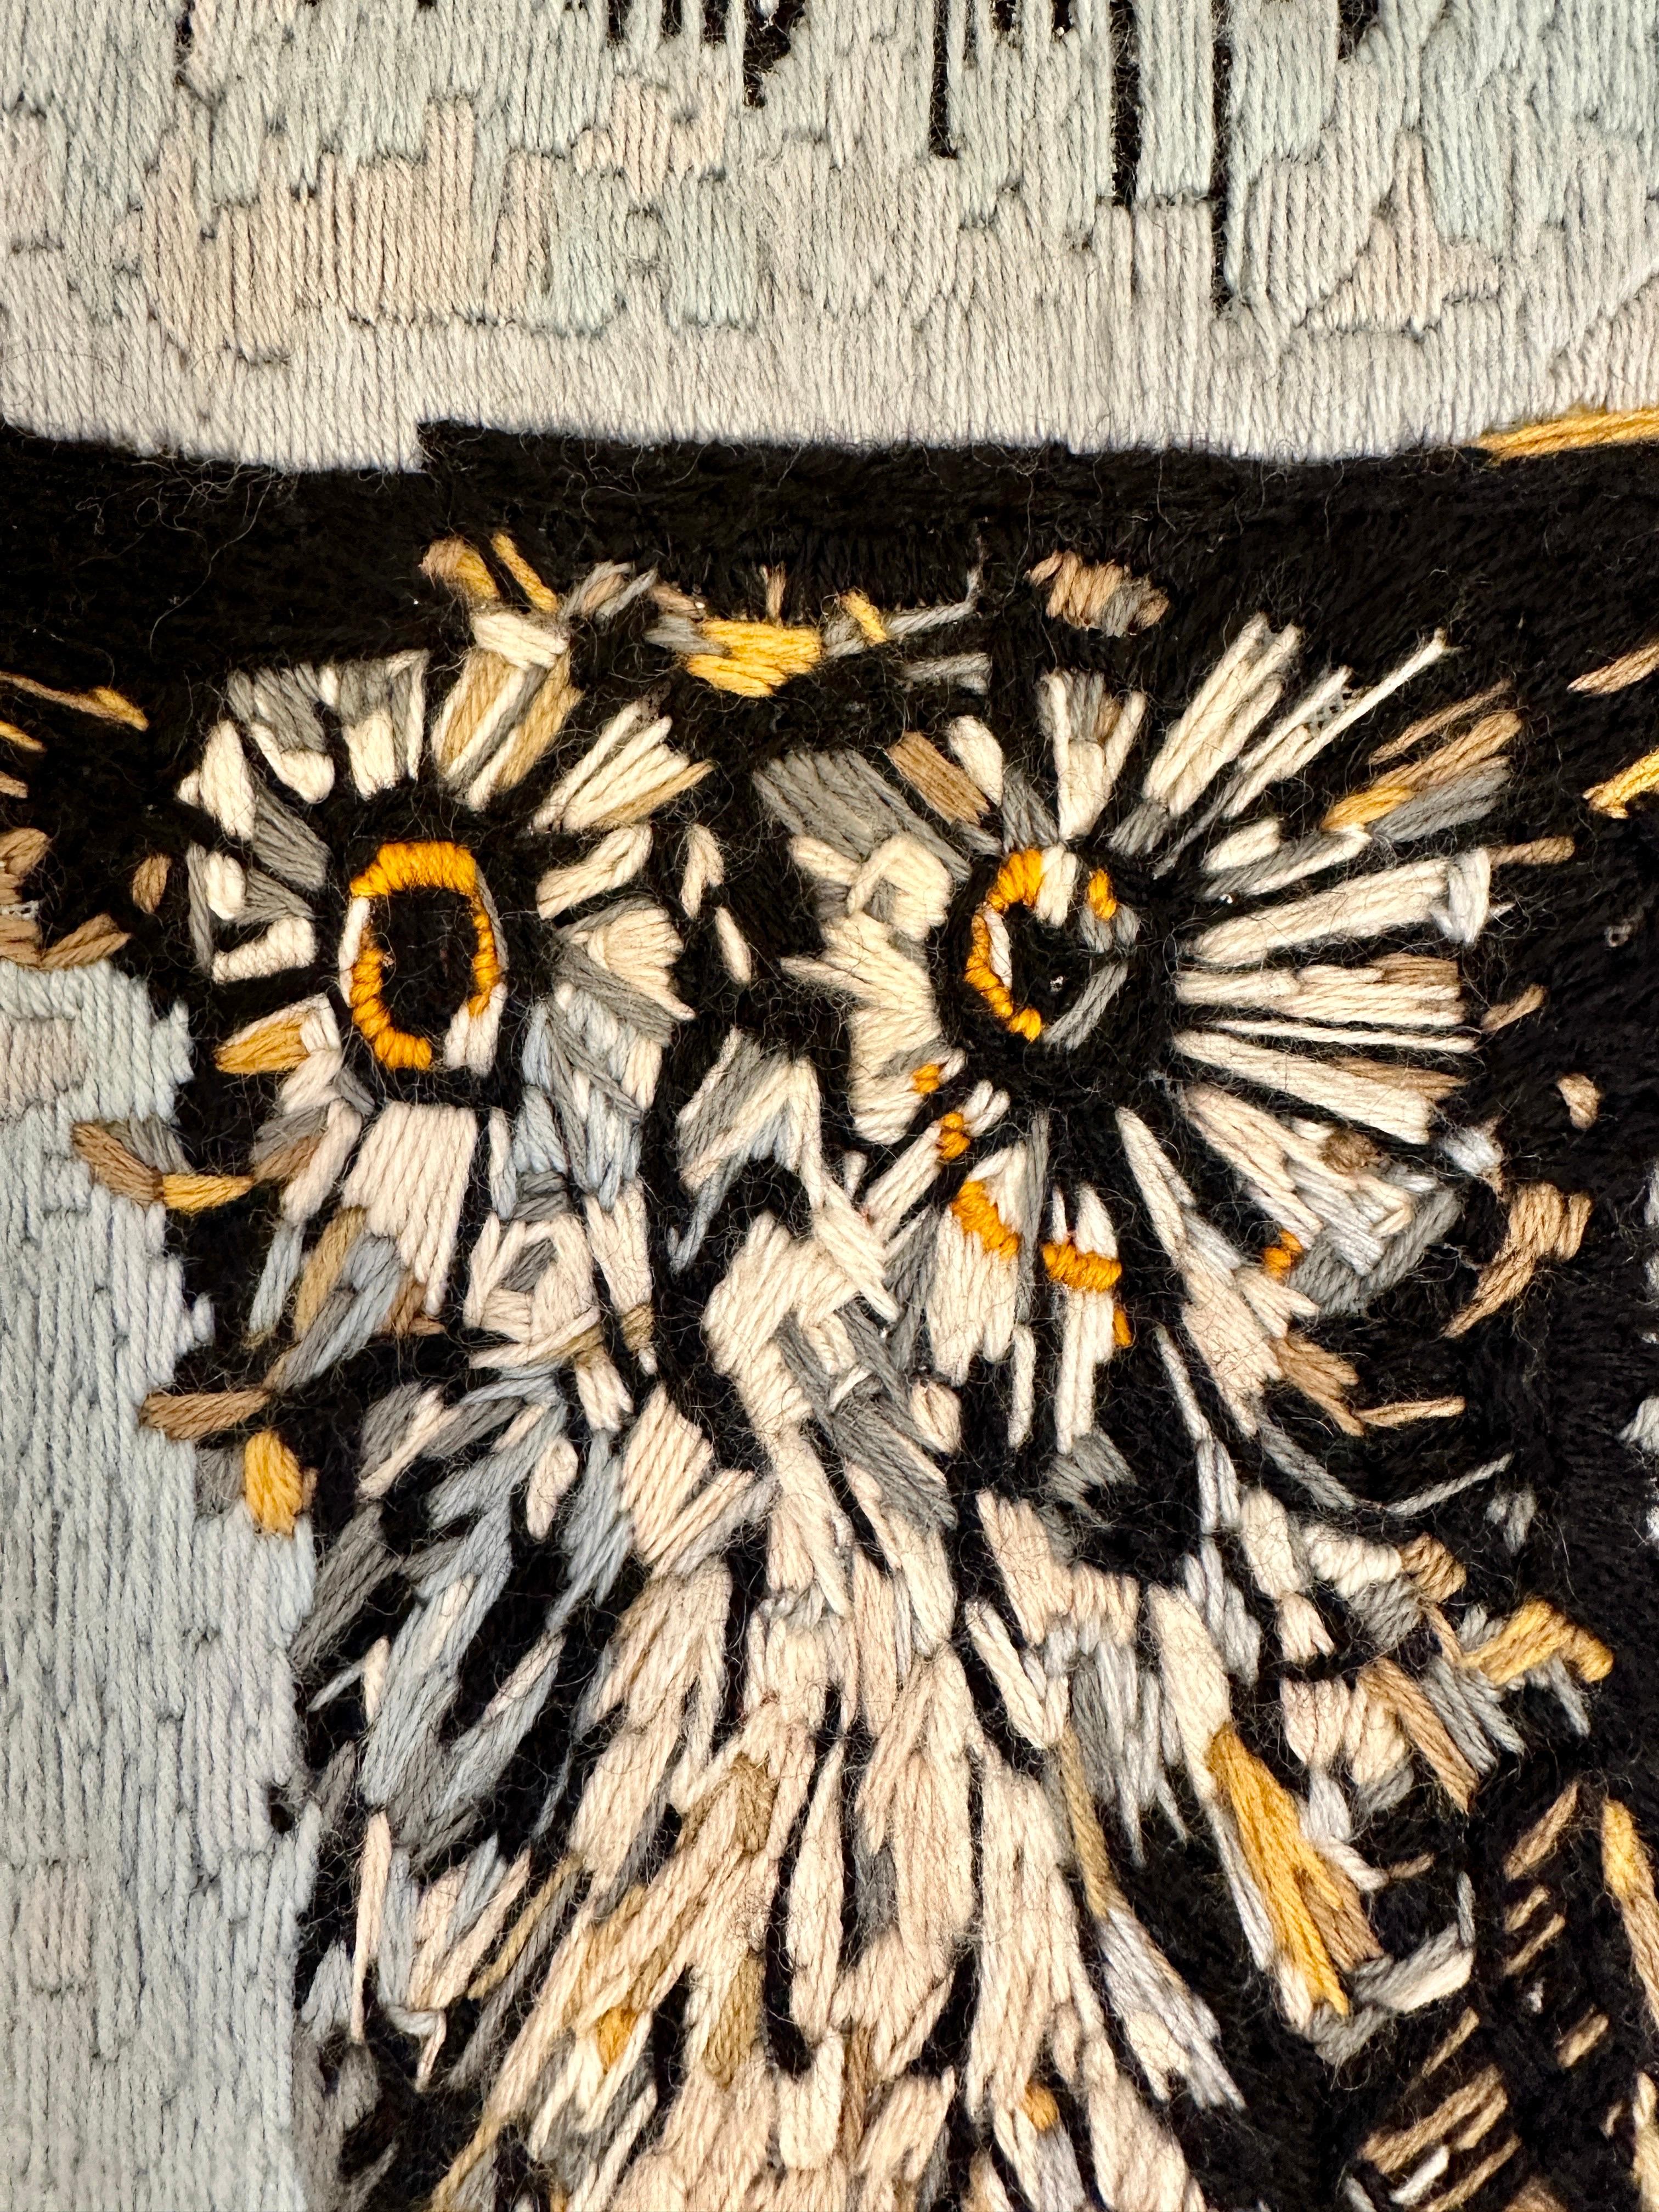 From 1969, this collaboration between Bernard Buffet and the renowned weavers, DMC (founded in 1746) created this charming representation of an small owl perched on a branch.  THIS ITEM IS LOCATED AND WILL SHIP FROM OUR MIAMI, FLORIDA SHOWROOM.